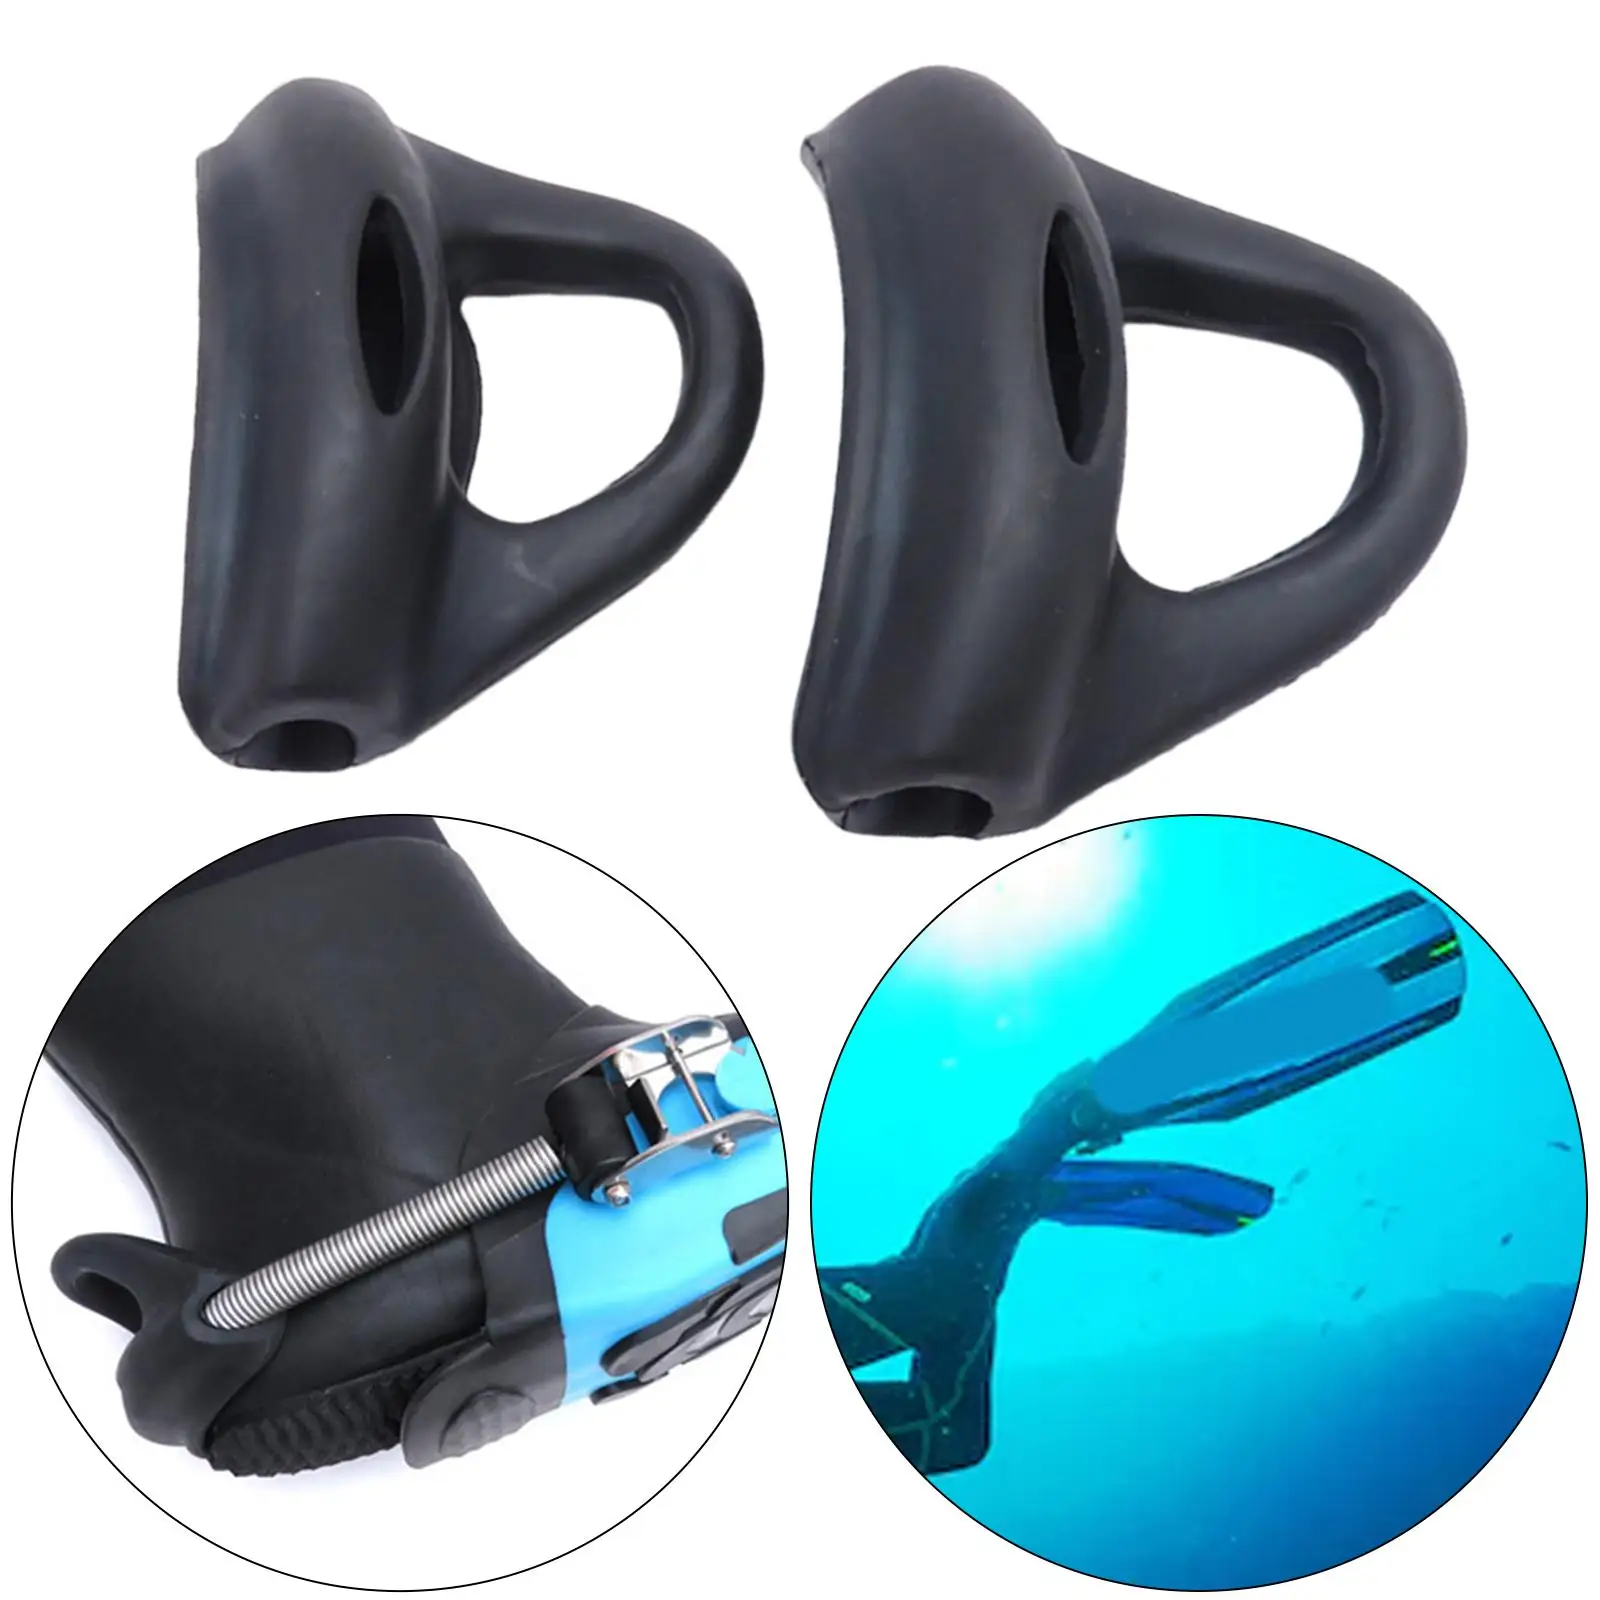 Scuba Diving Spring Strap Heel Shoe Lace Heel Replace Fixing for Canoeing